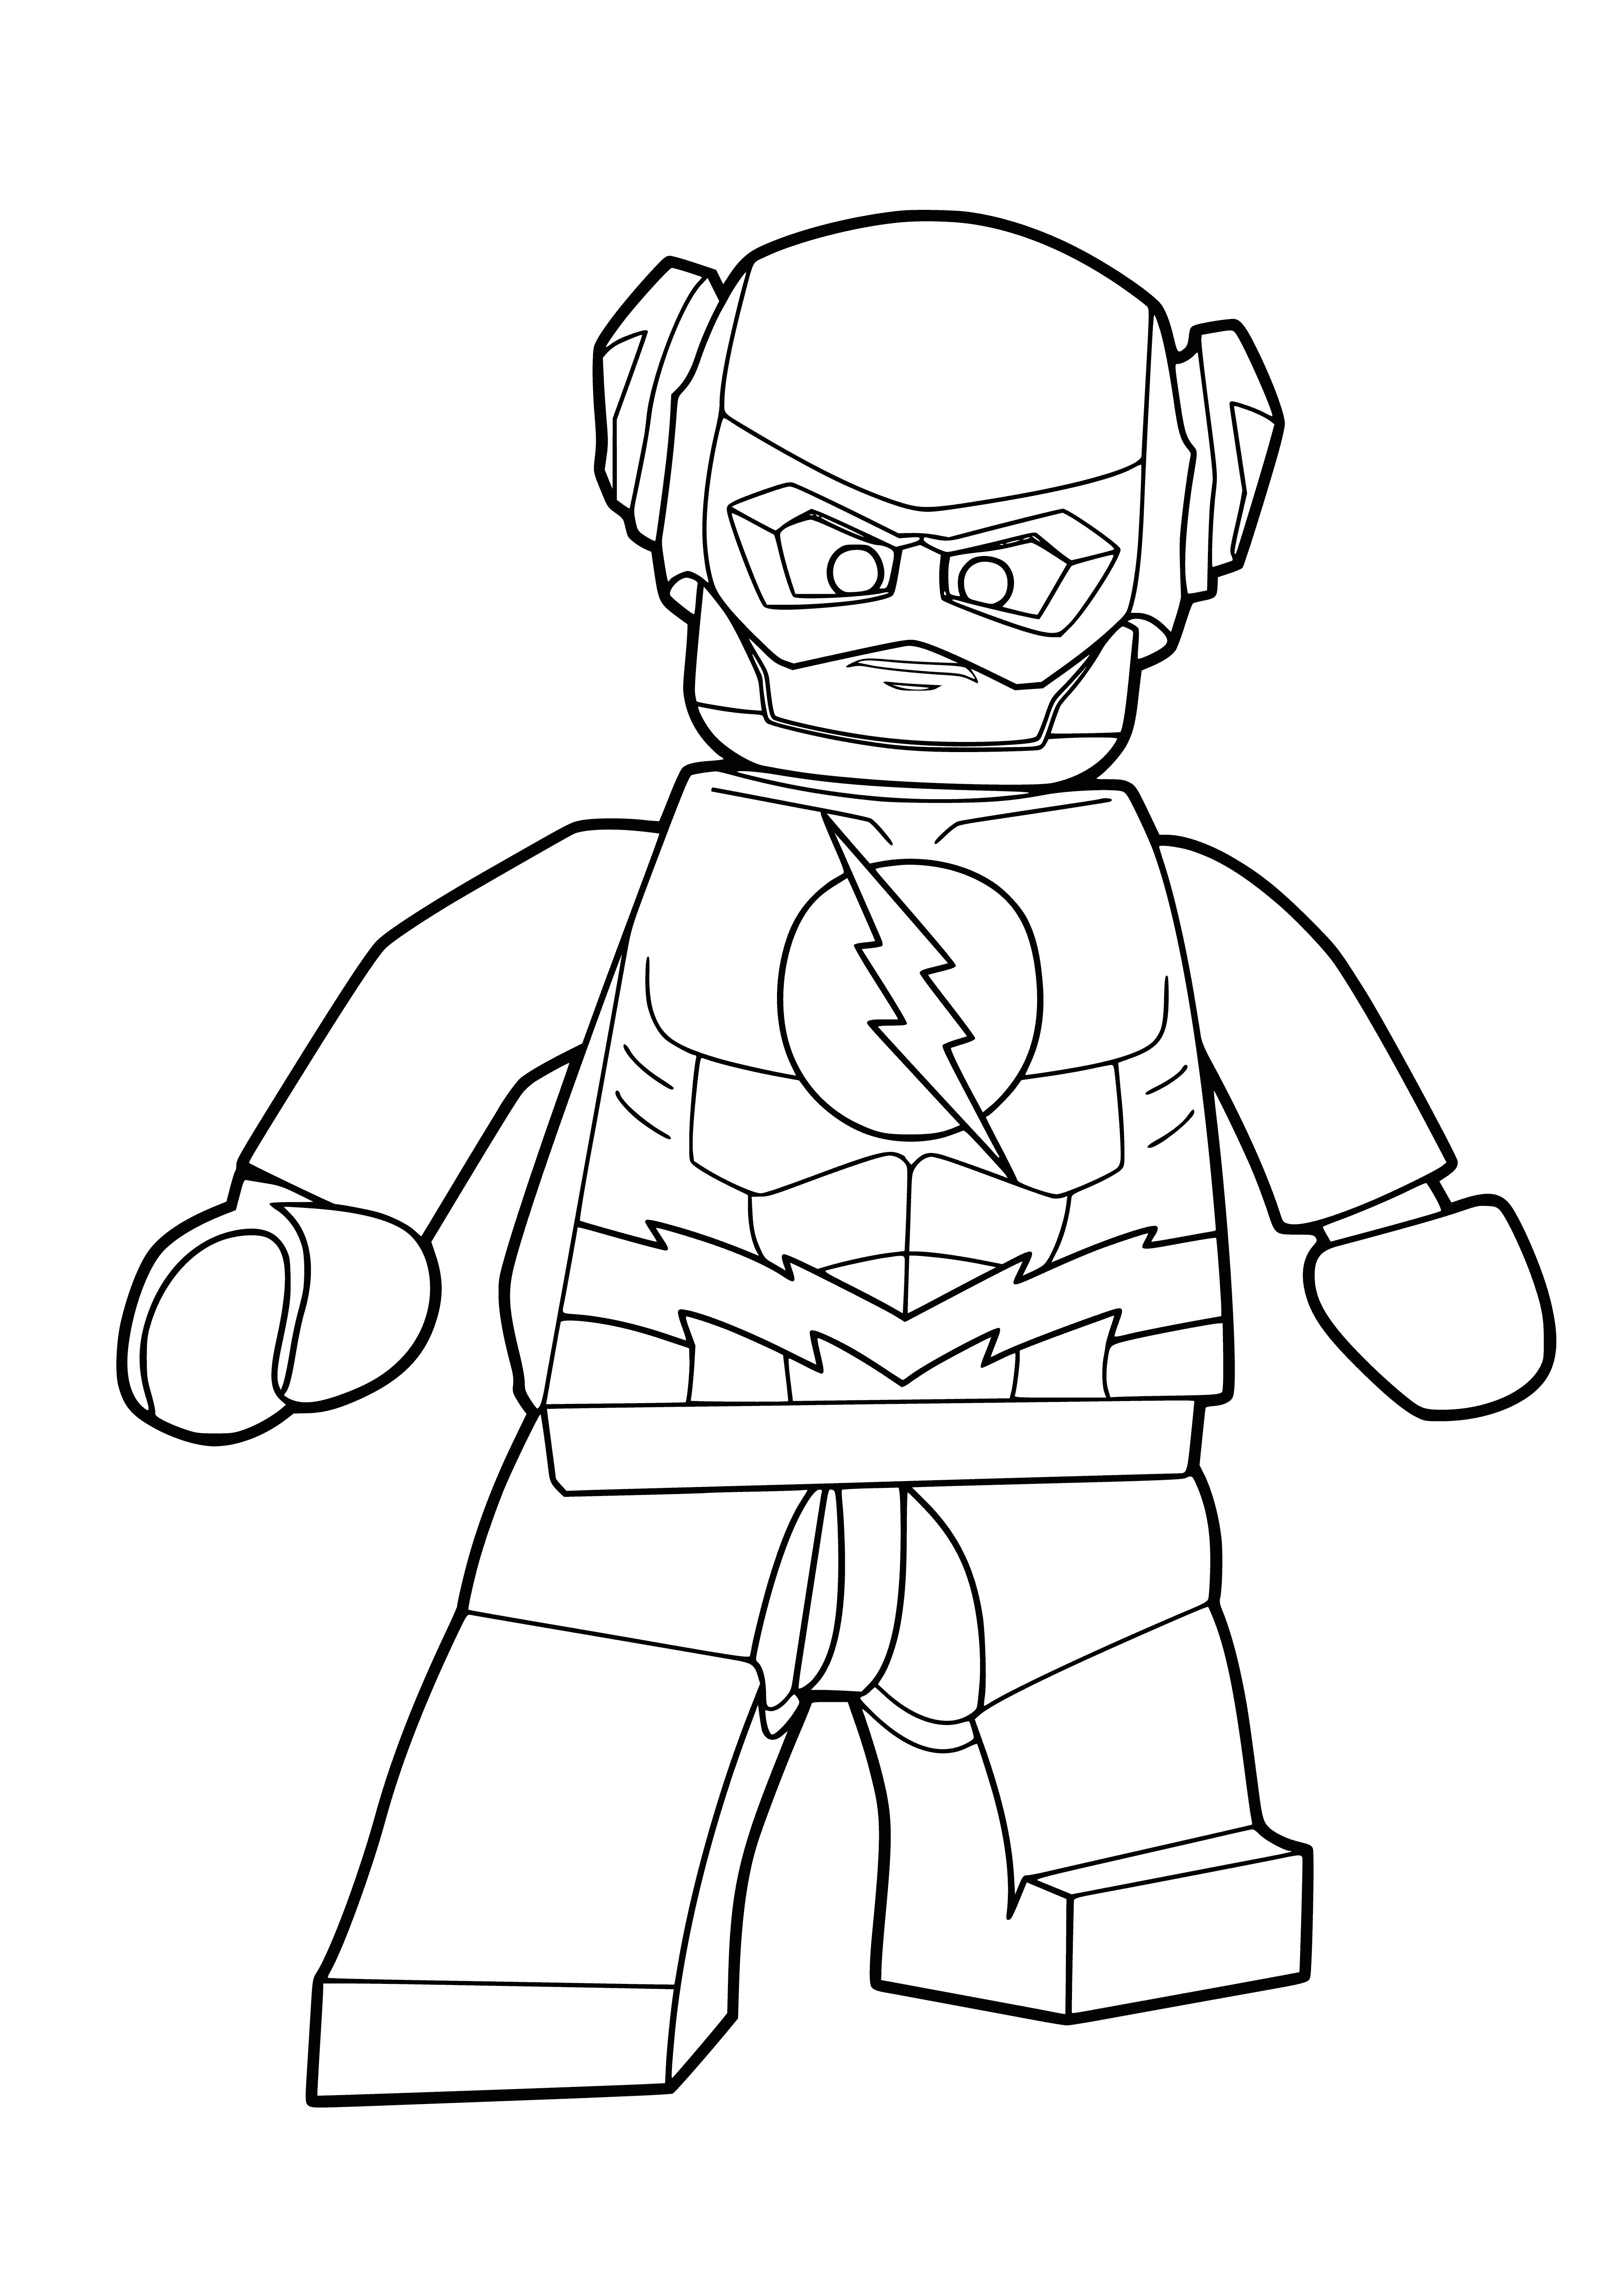 Flush coloring page